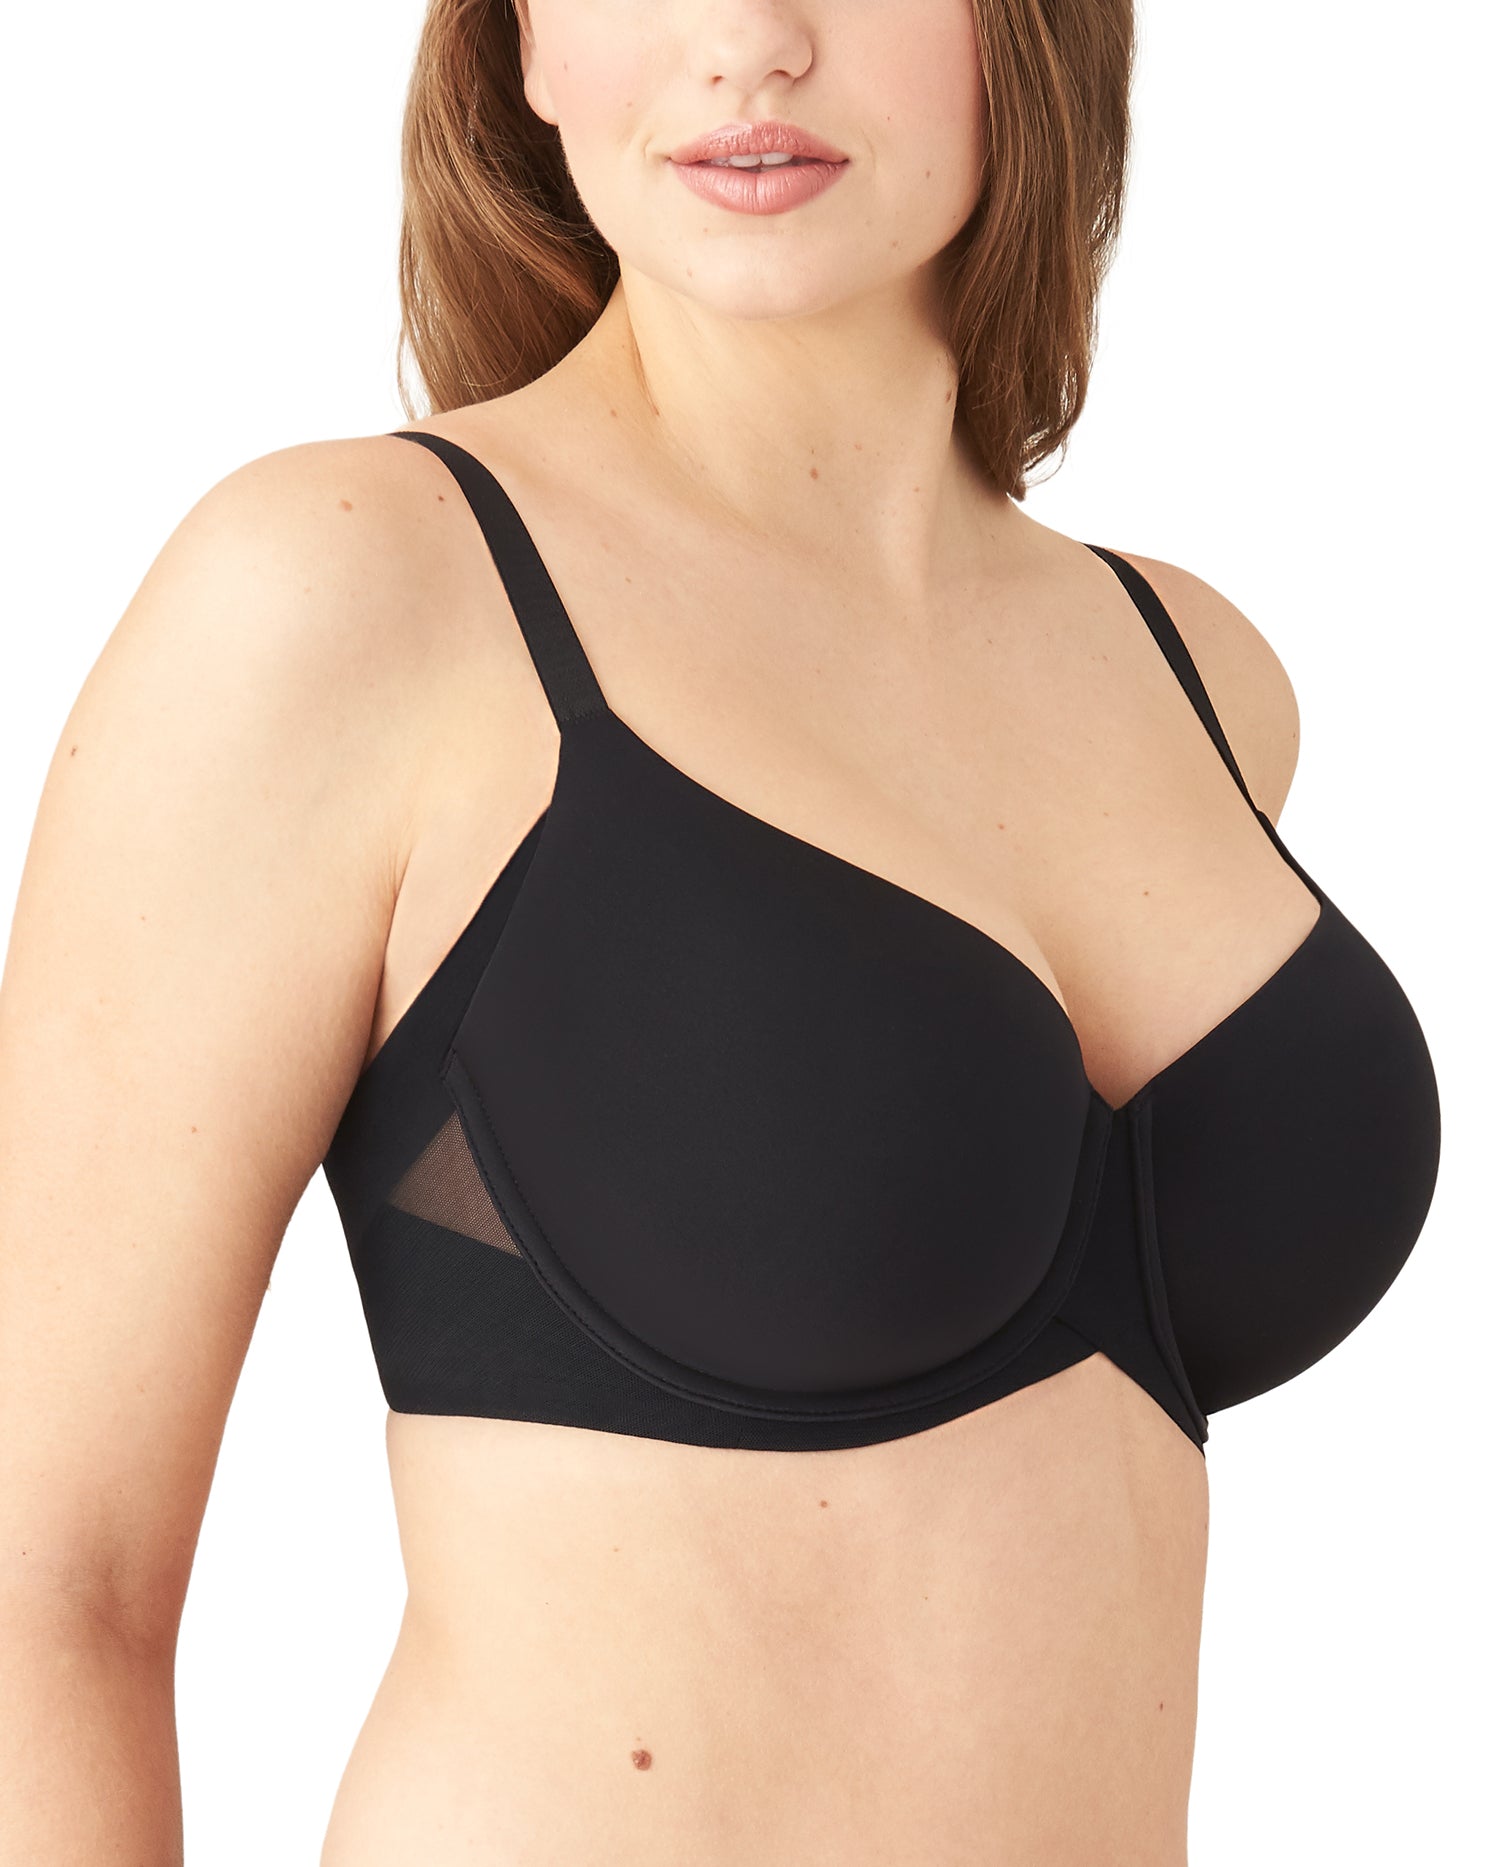 Wacoal Womens Ultimate Side Smoother Underwire T-Shirt Bra